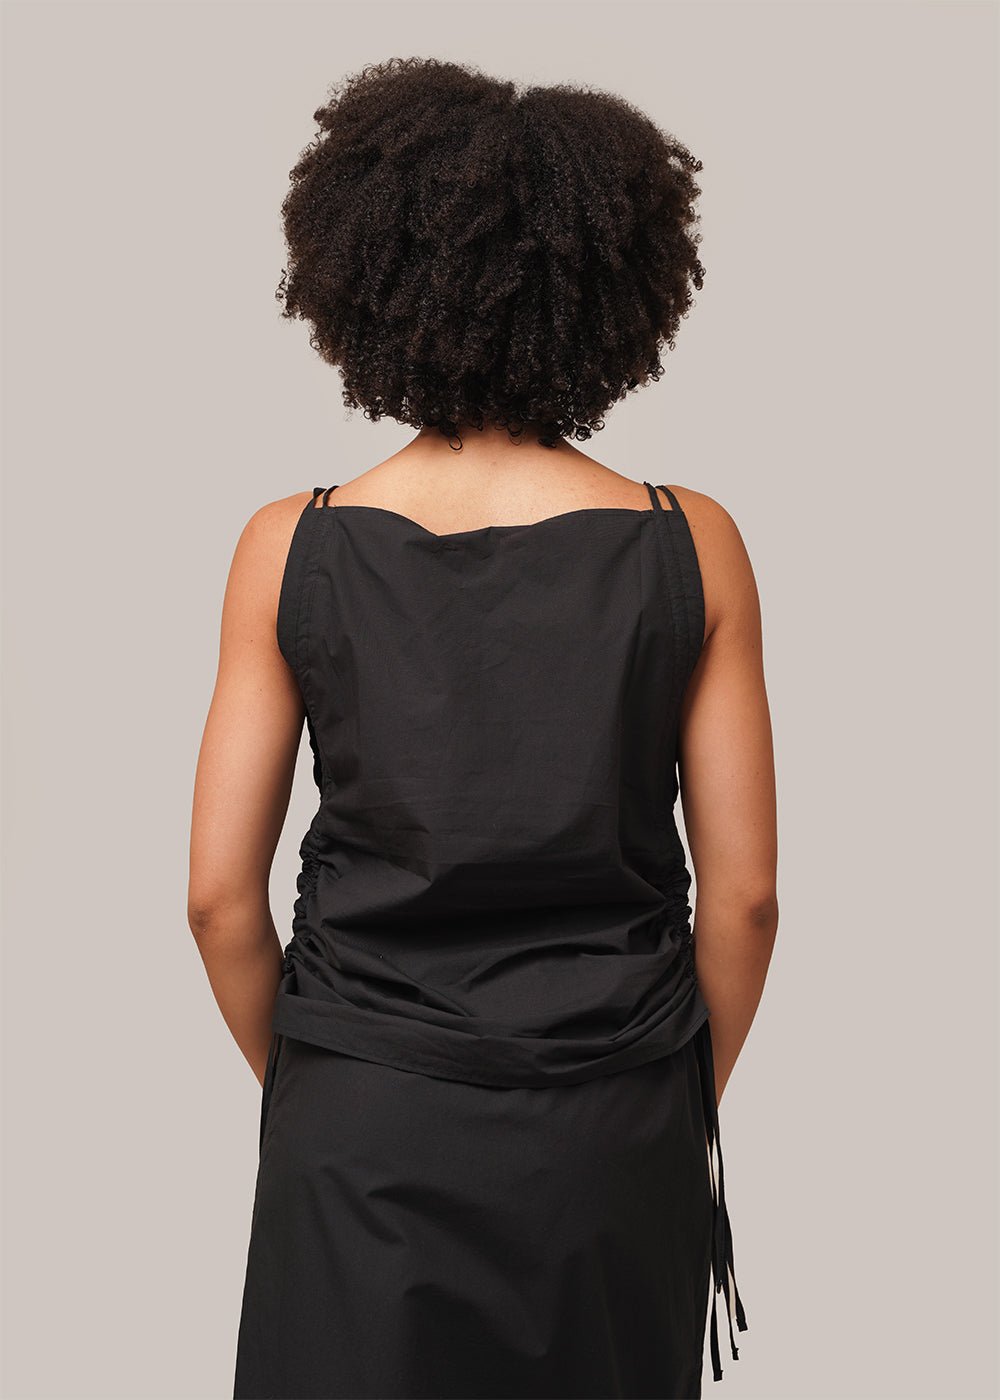 Baserange Black Pictorial Strap Top - New Classics Studios Sustainable Ethical Fashion Canada